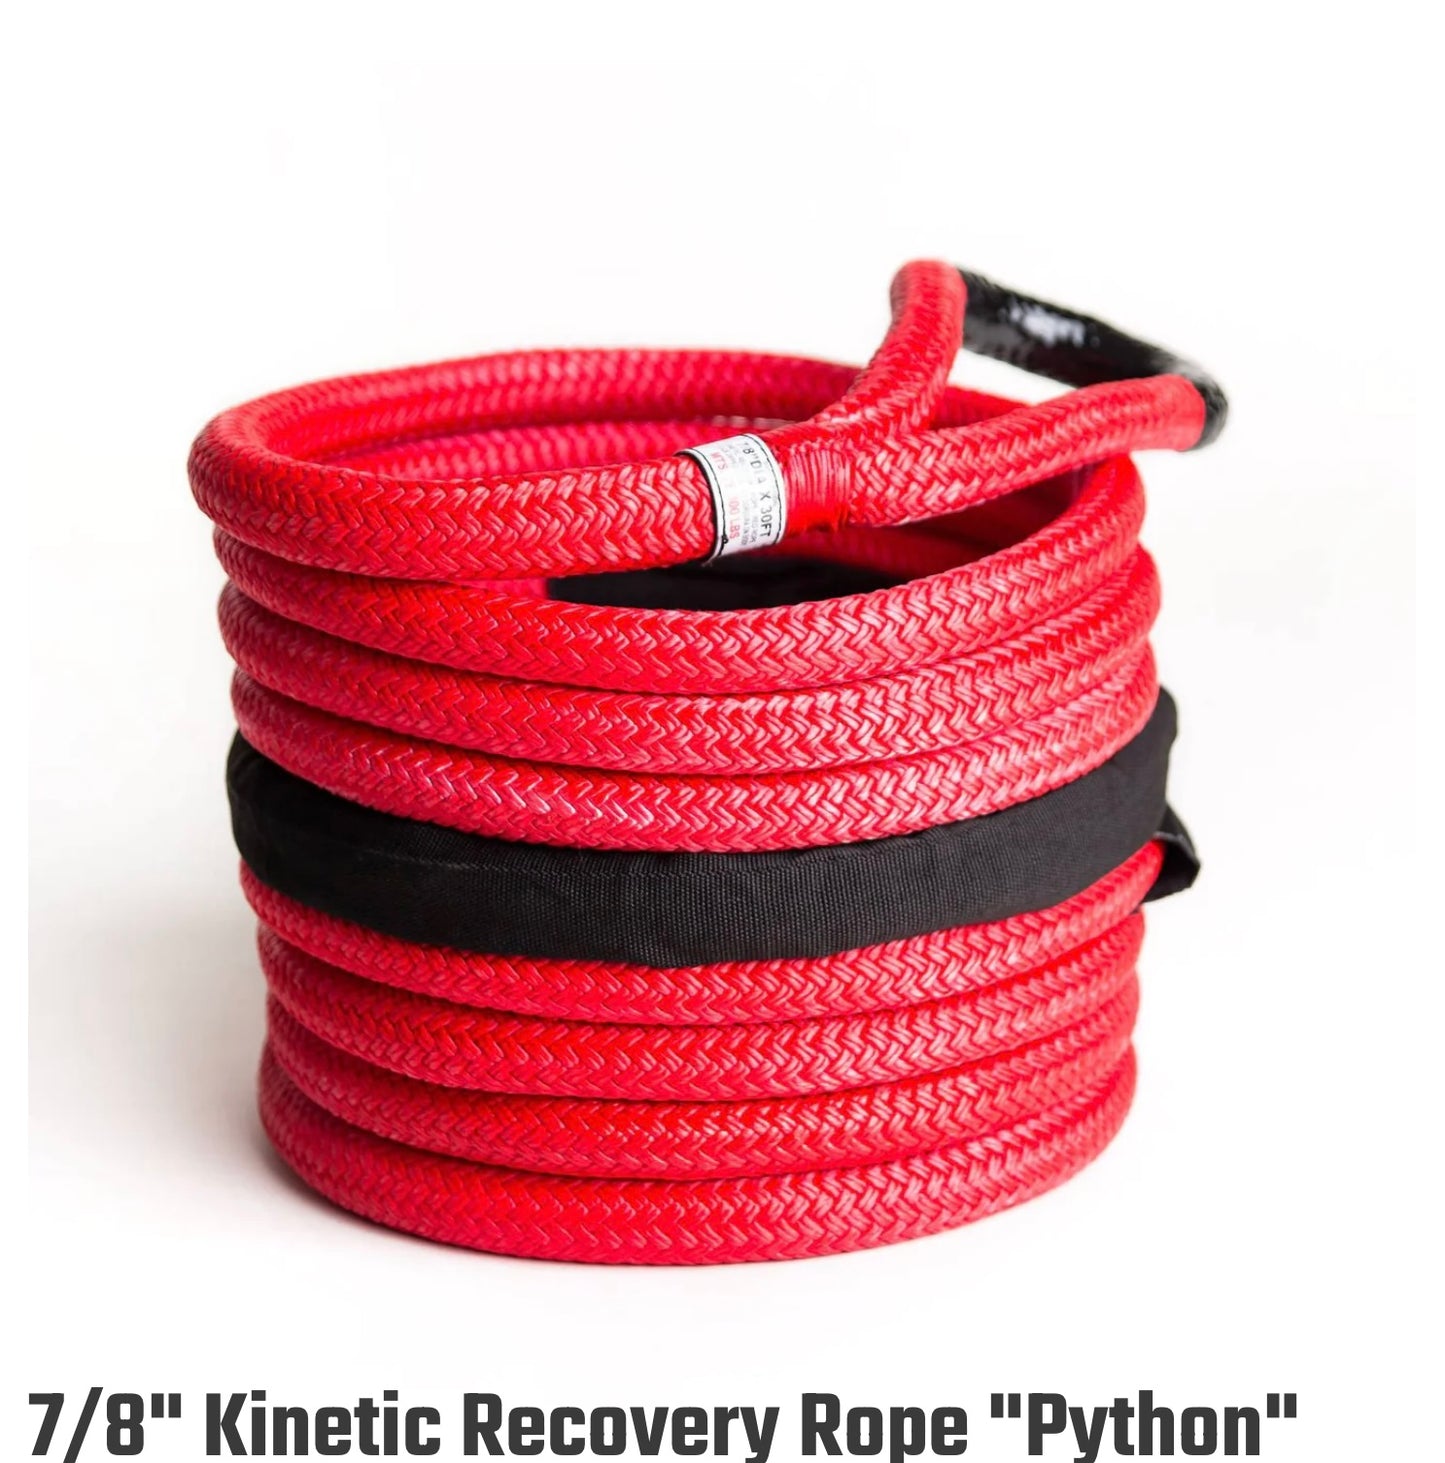 7/8" Kinetic Recovery Rope "Python" 20Foot